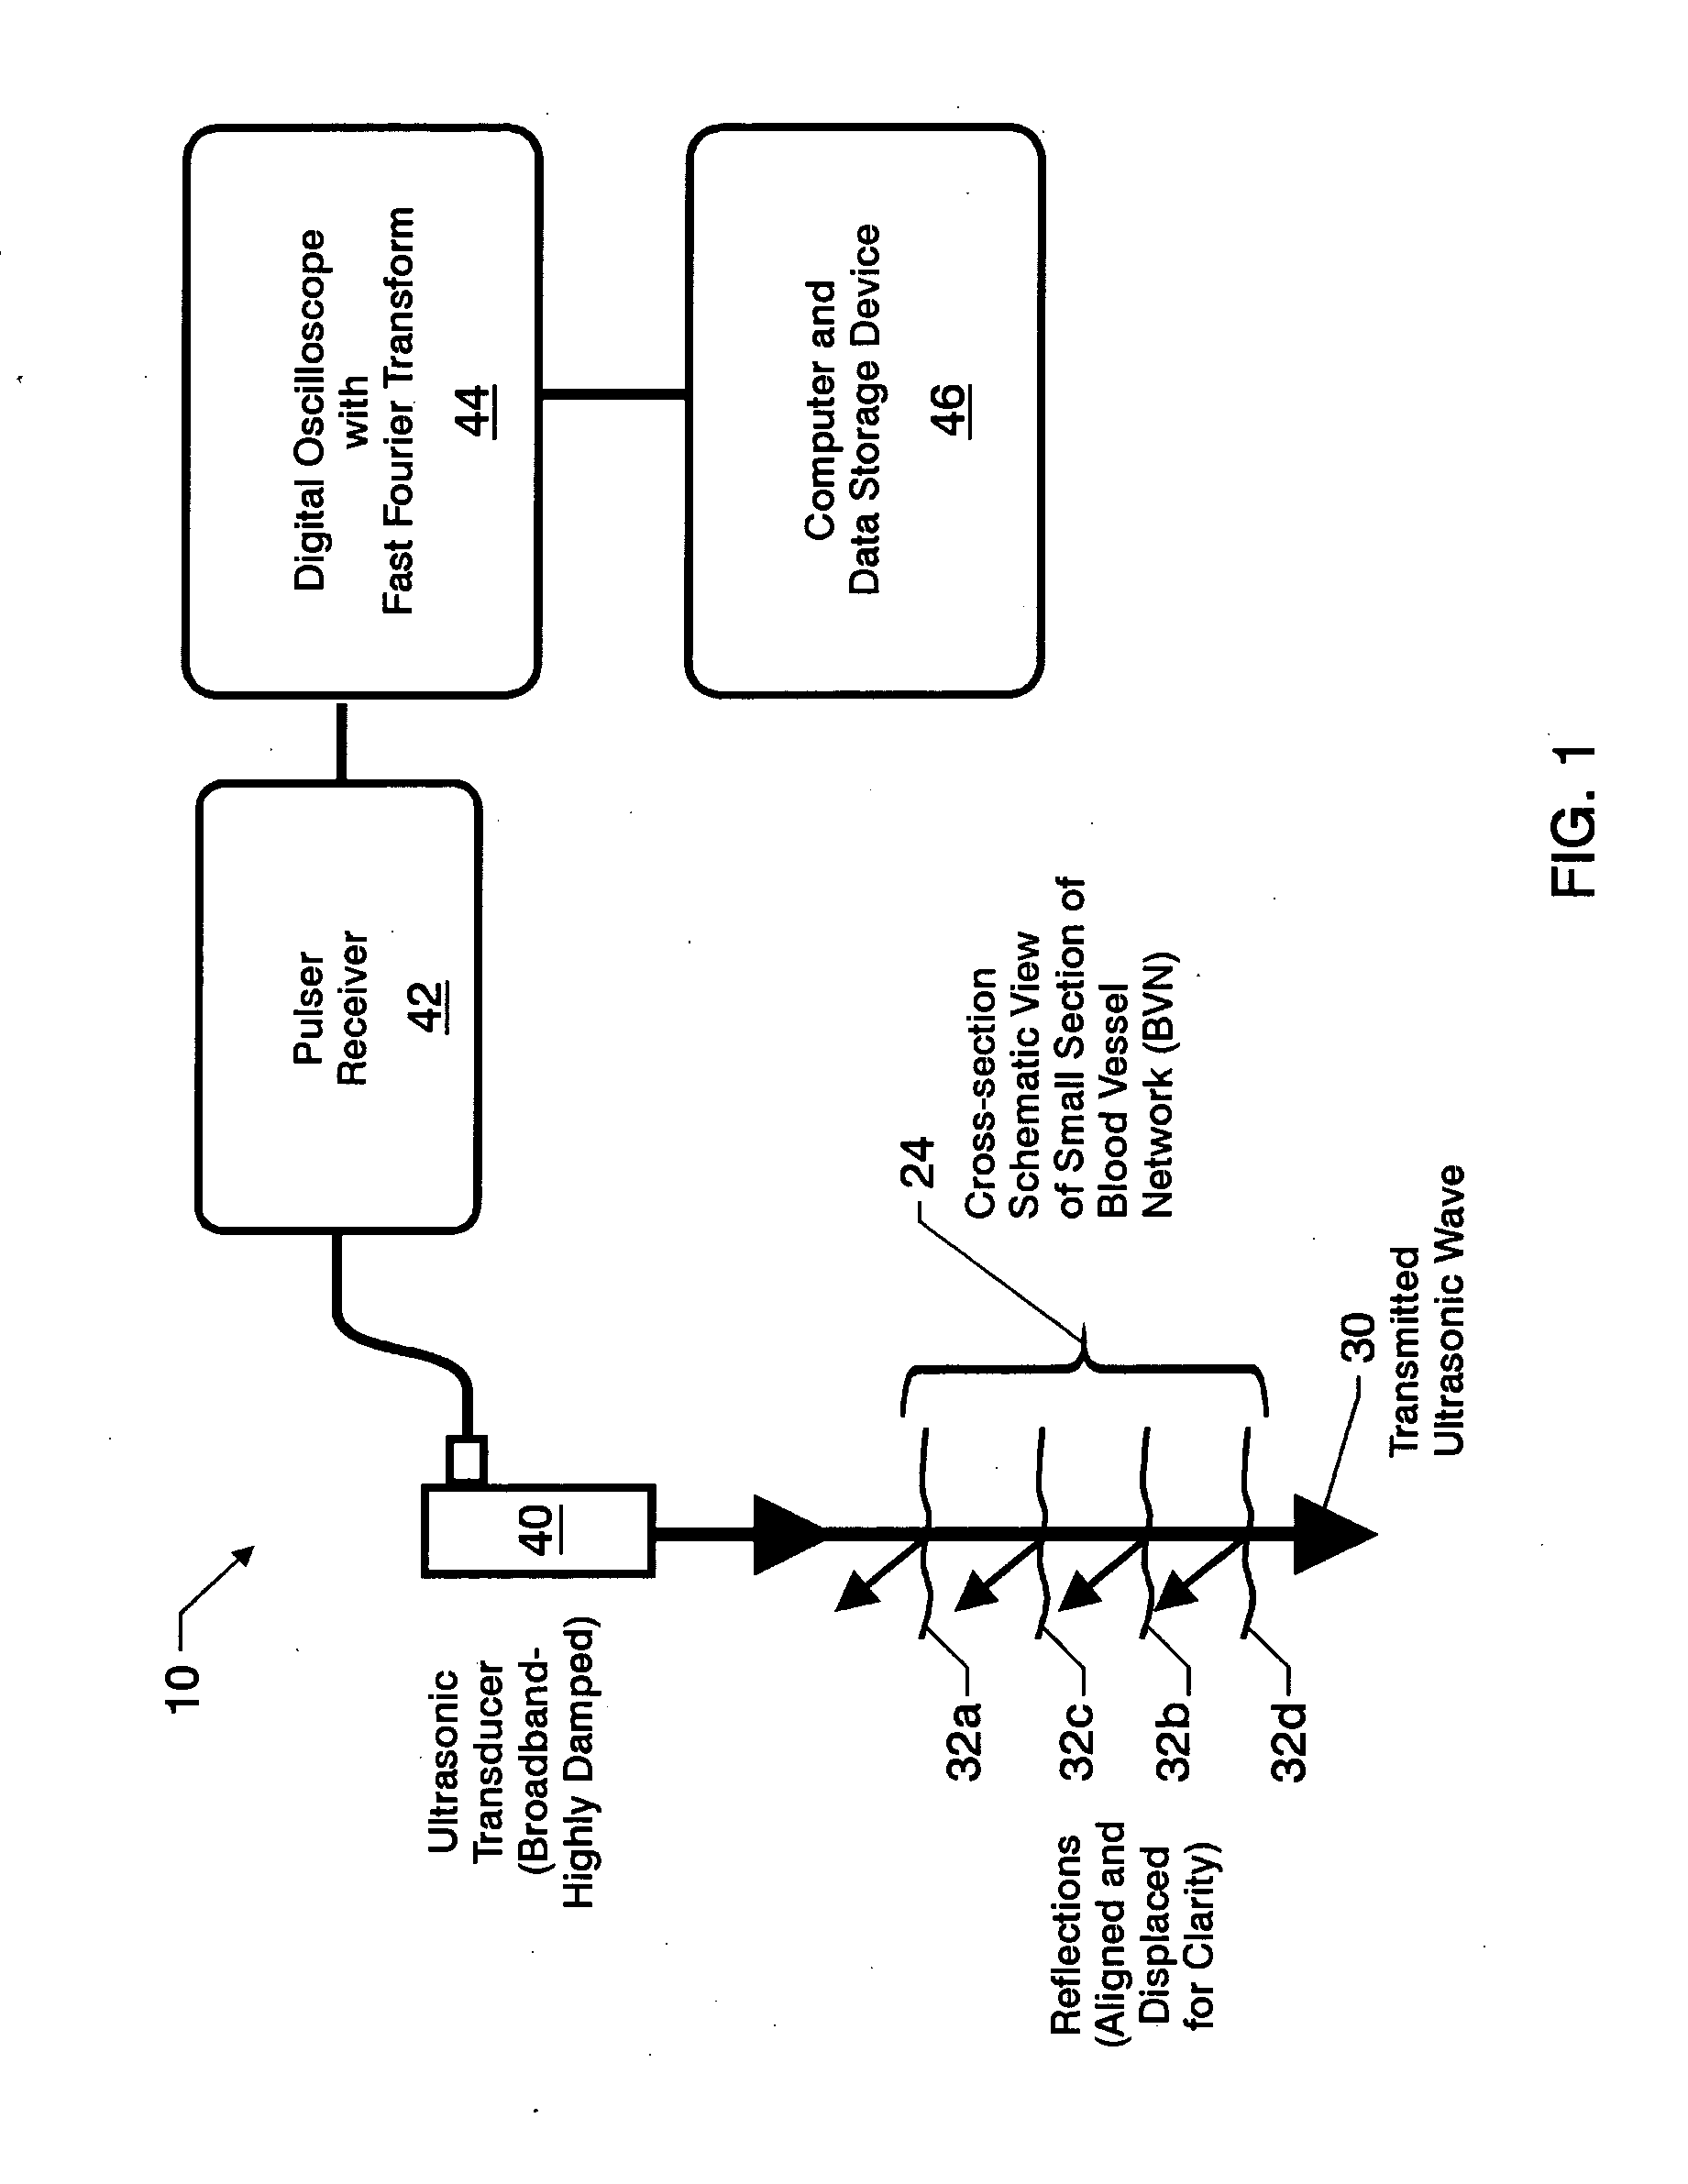 Ultrasonic apparatus and method to assess compartment syndrome